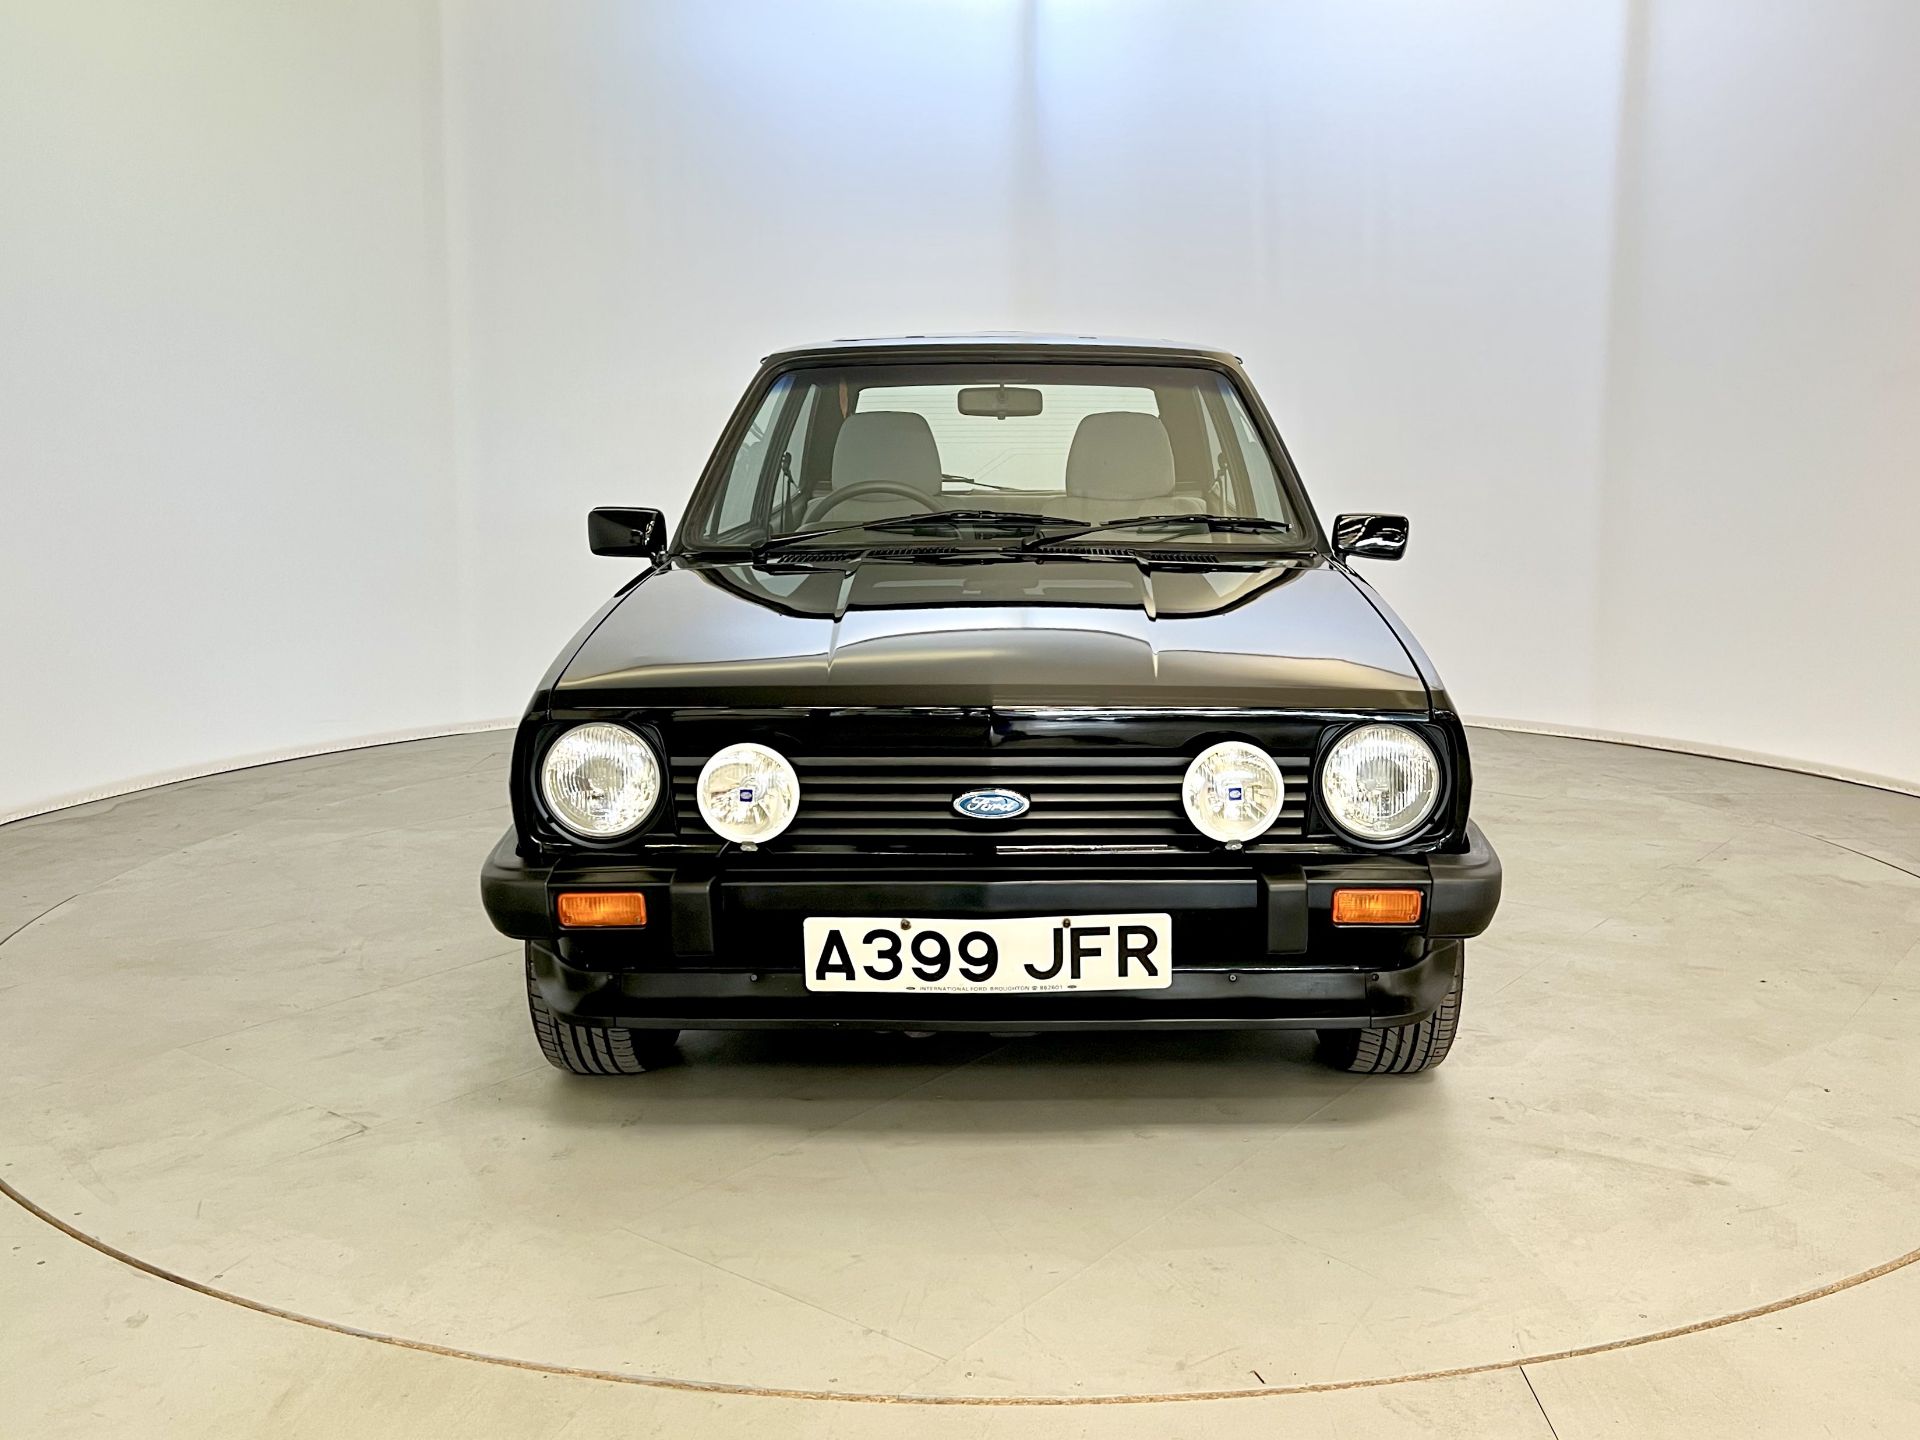 Ford Fiesta XR2 - Image 2 of 33